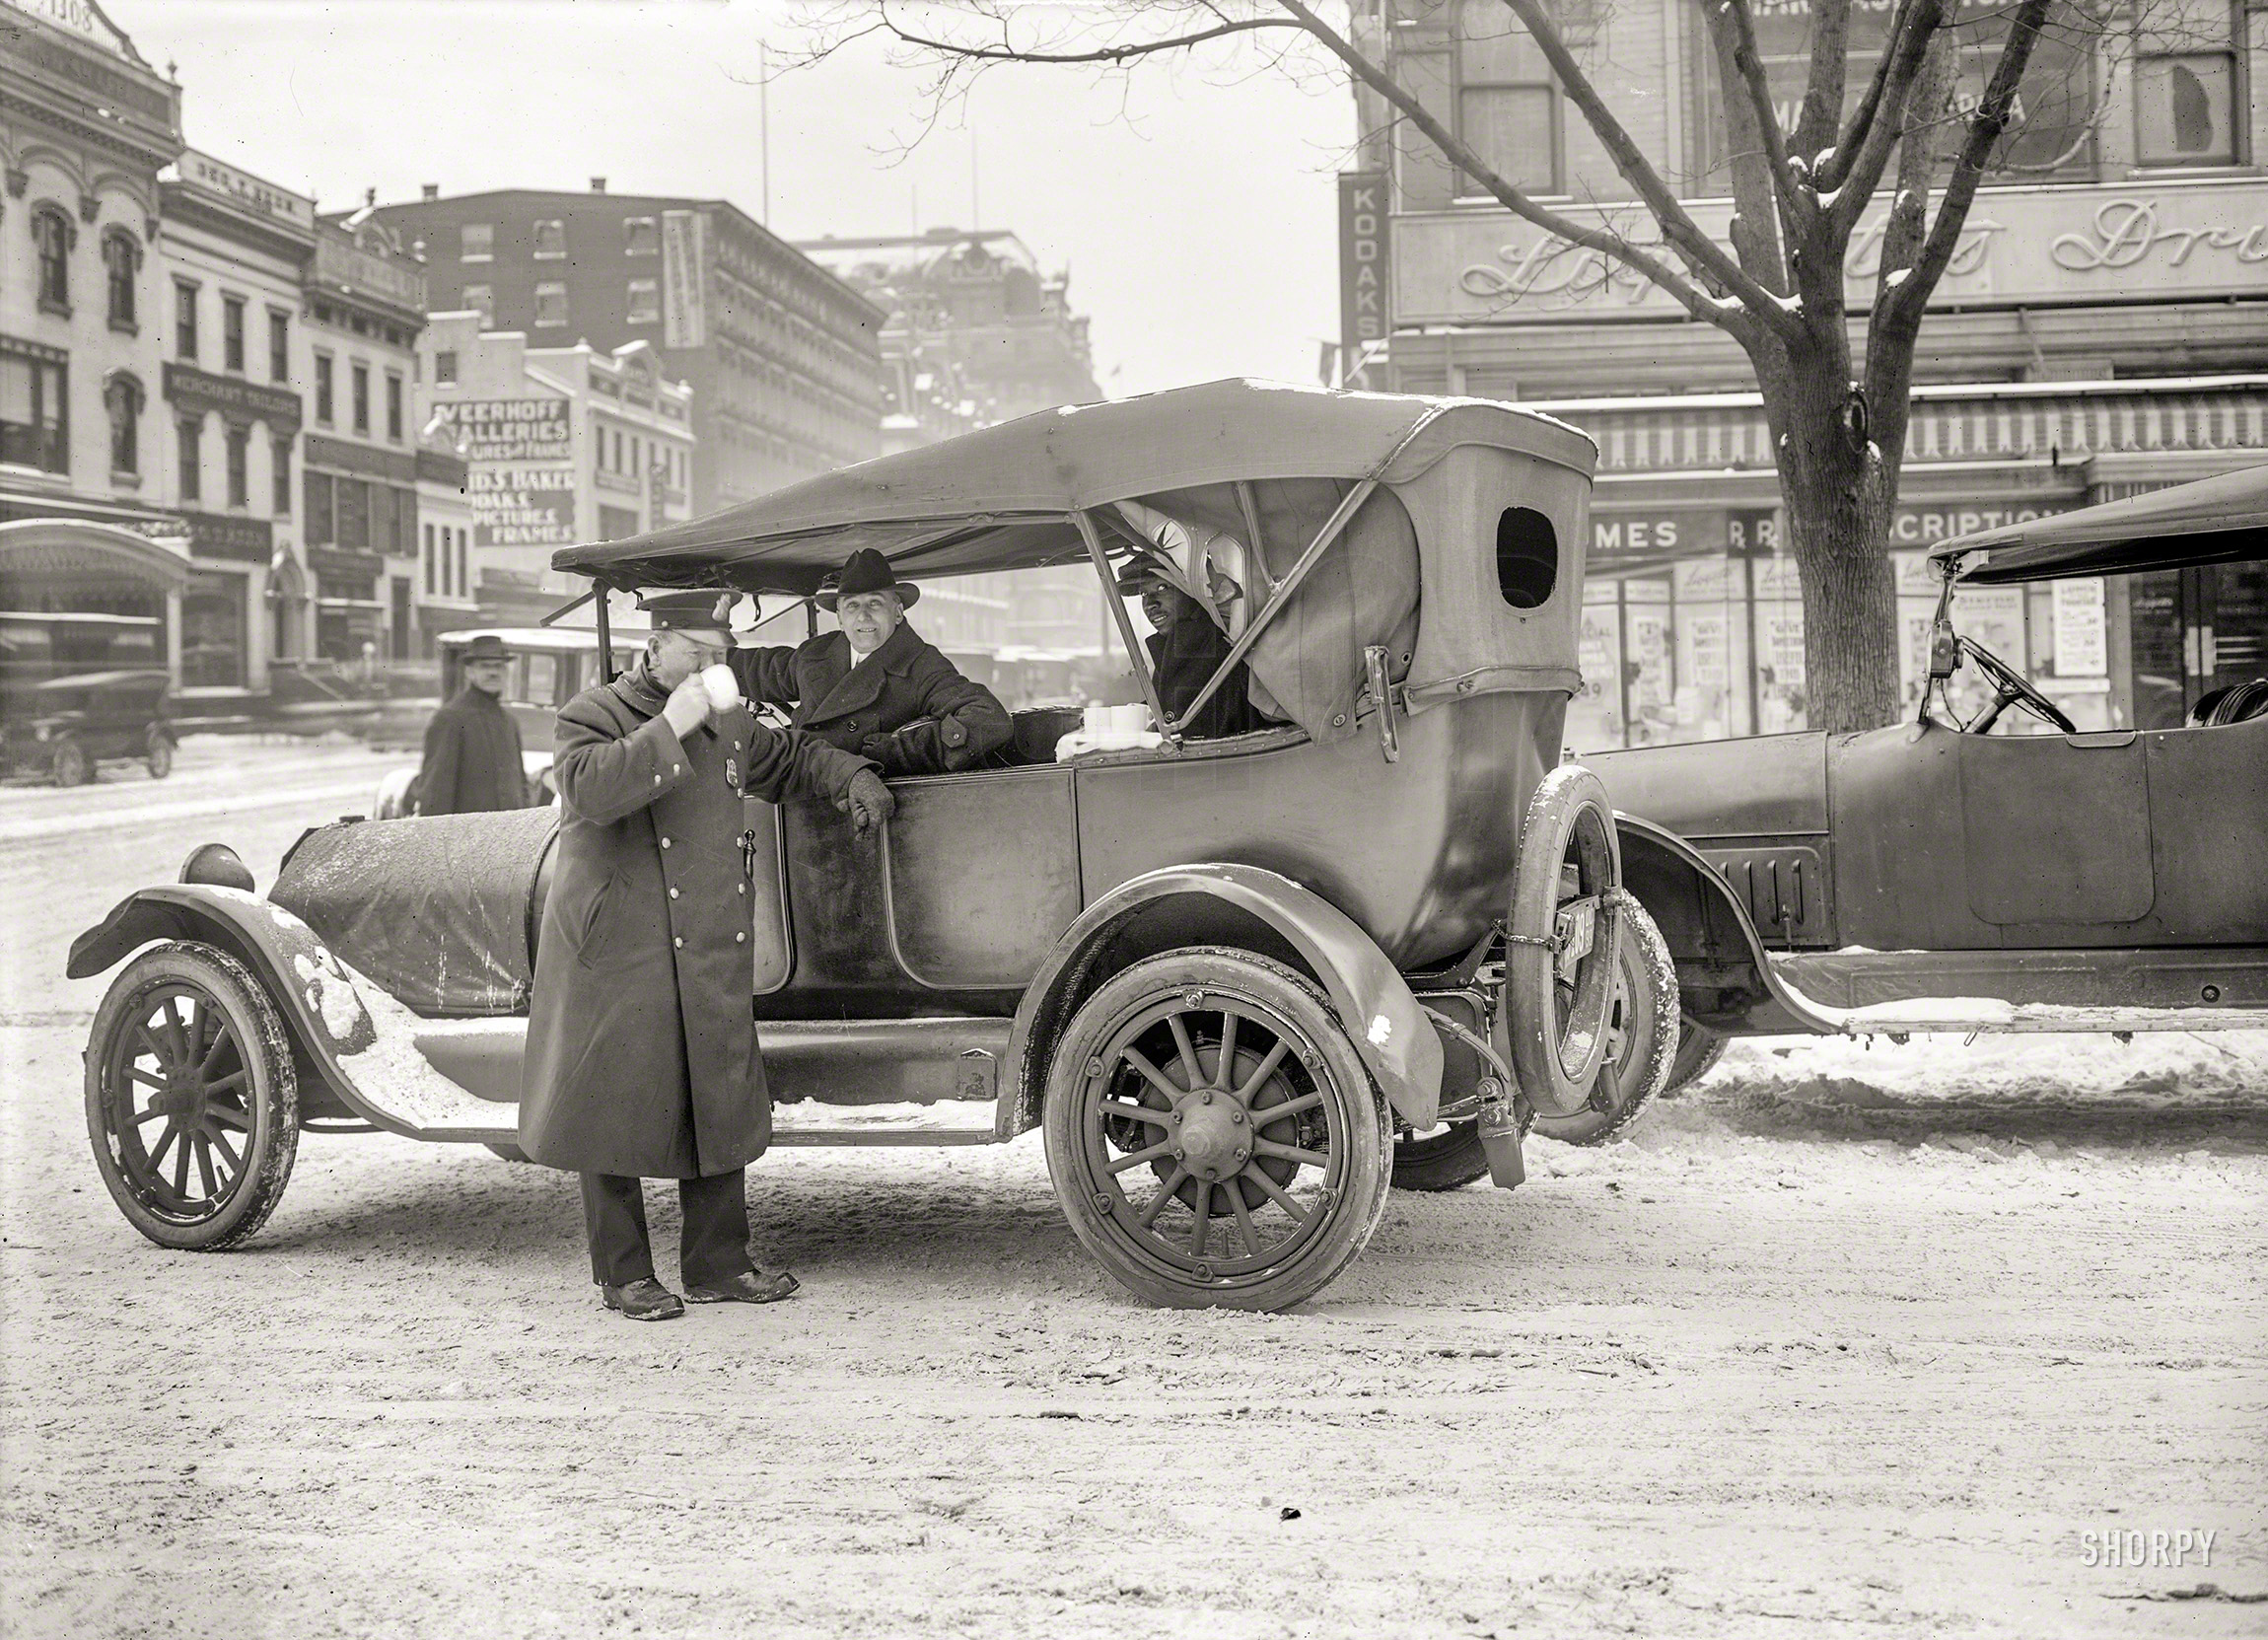 Washington, D.C, 1919. "Police coffee." Continuing this caffeinated, steamy saga. National Photo Company Collection glass negative. View full size.